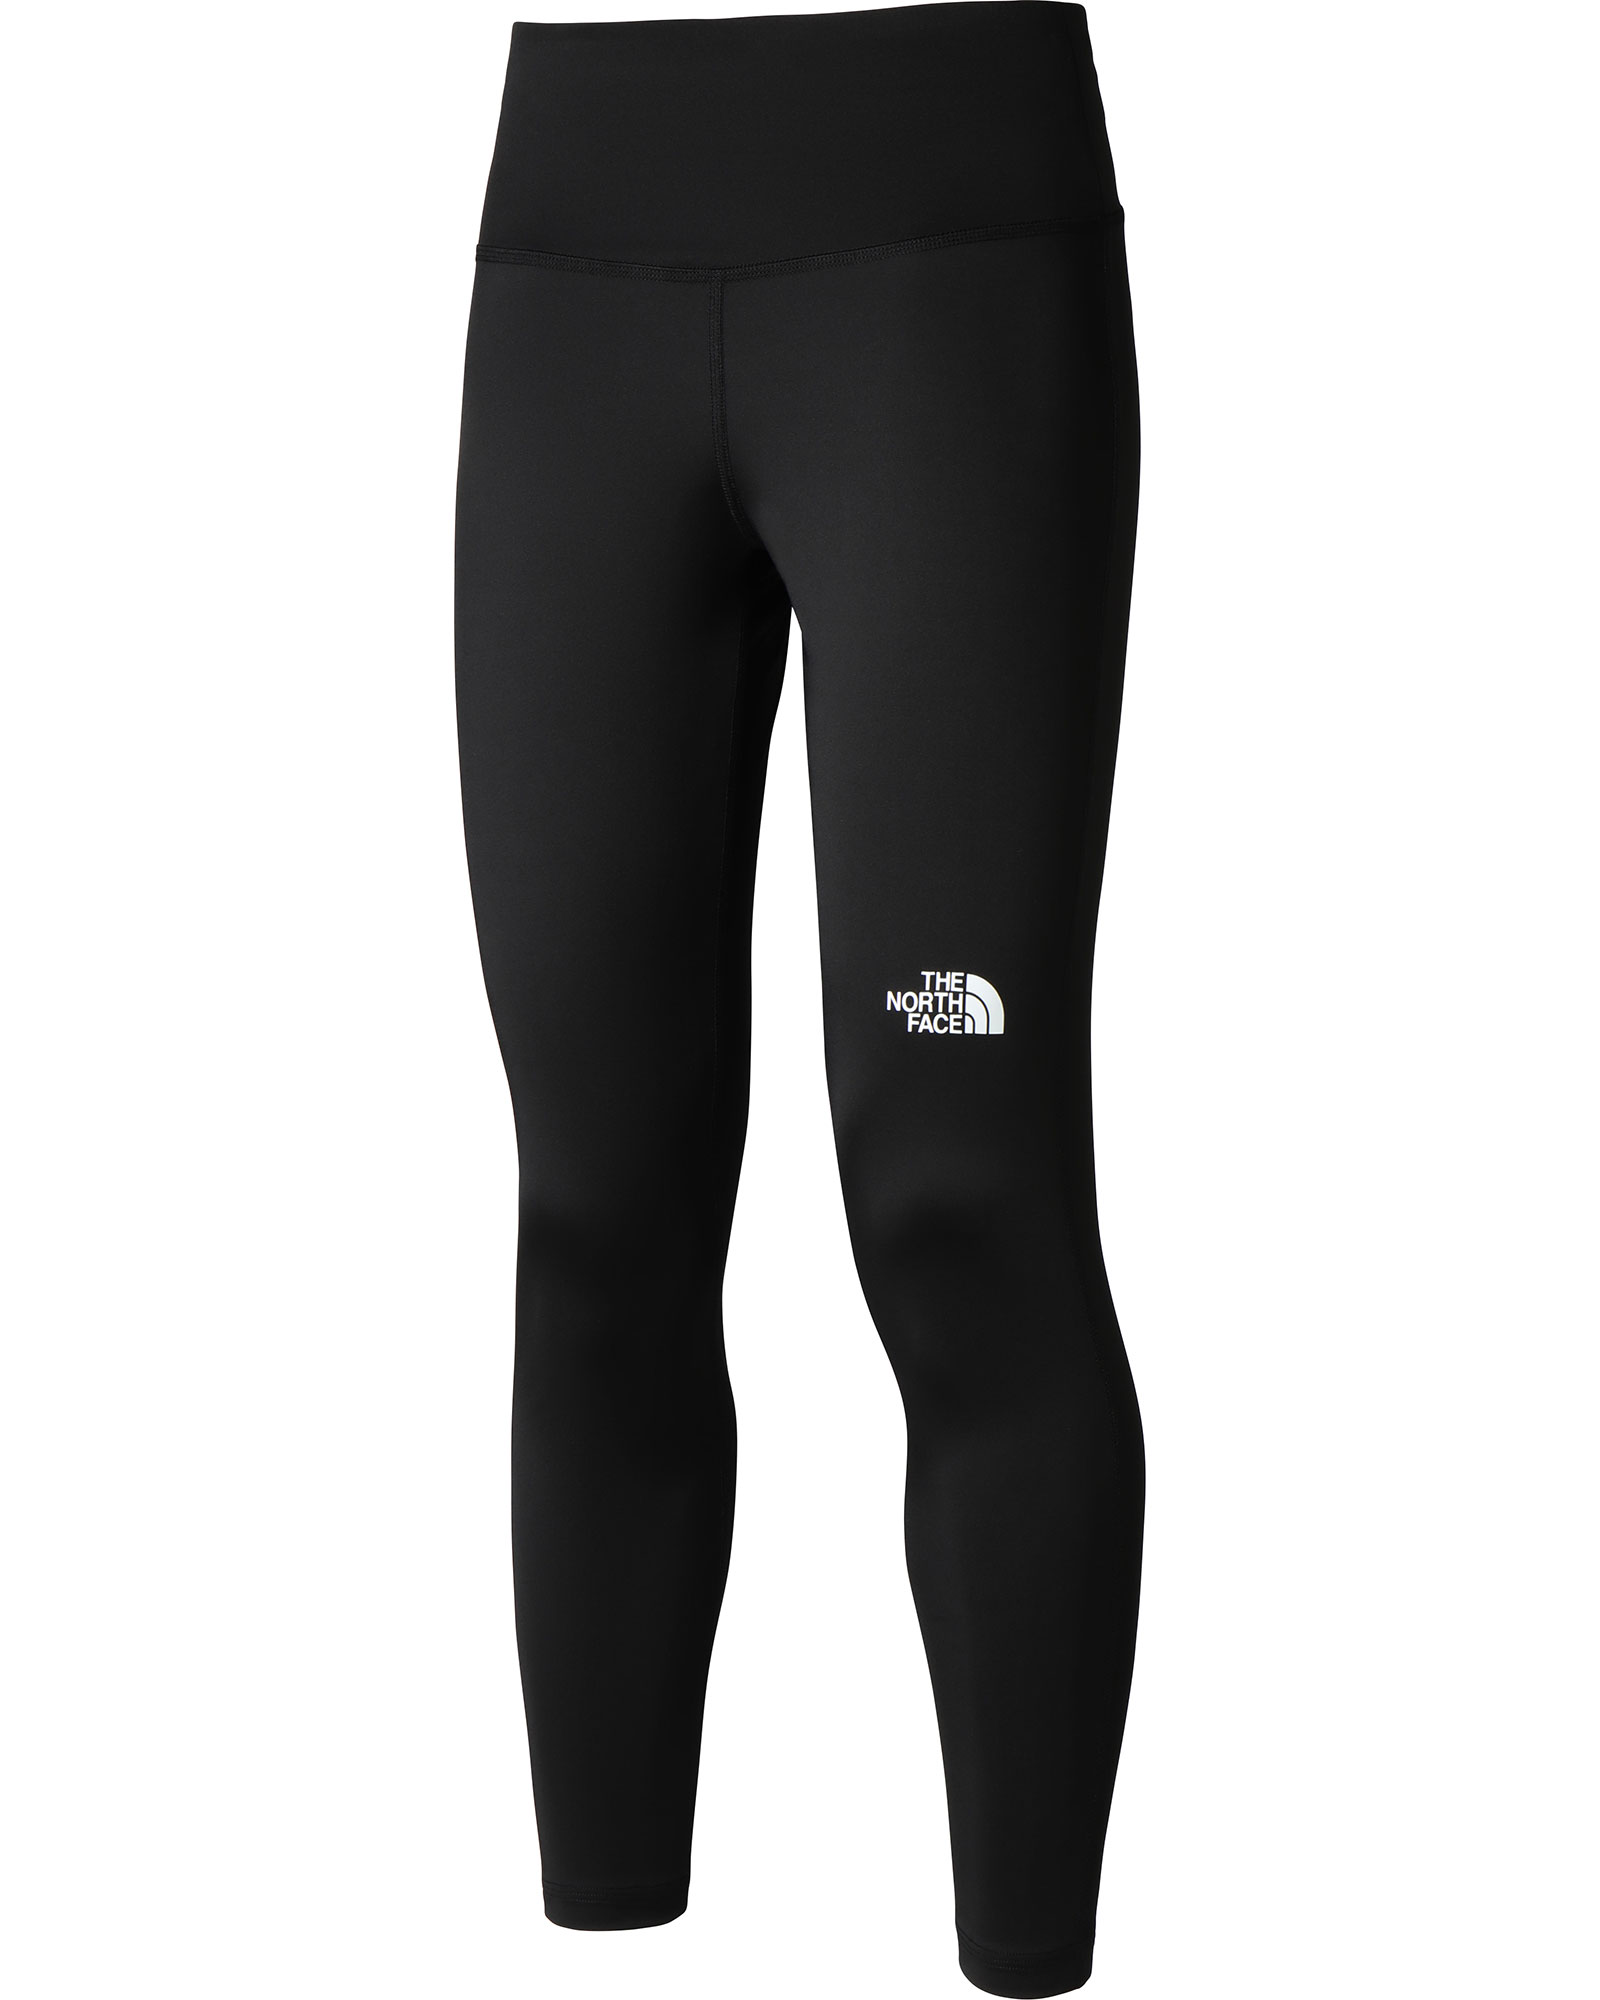 The North Face Womens Flex High Rise 7/8 Tight